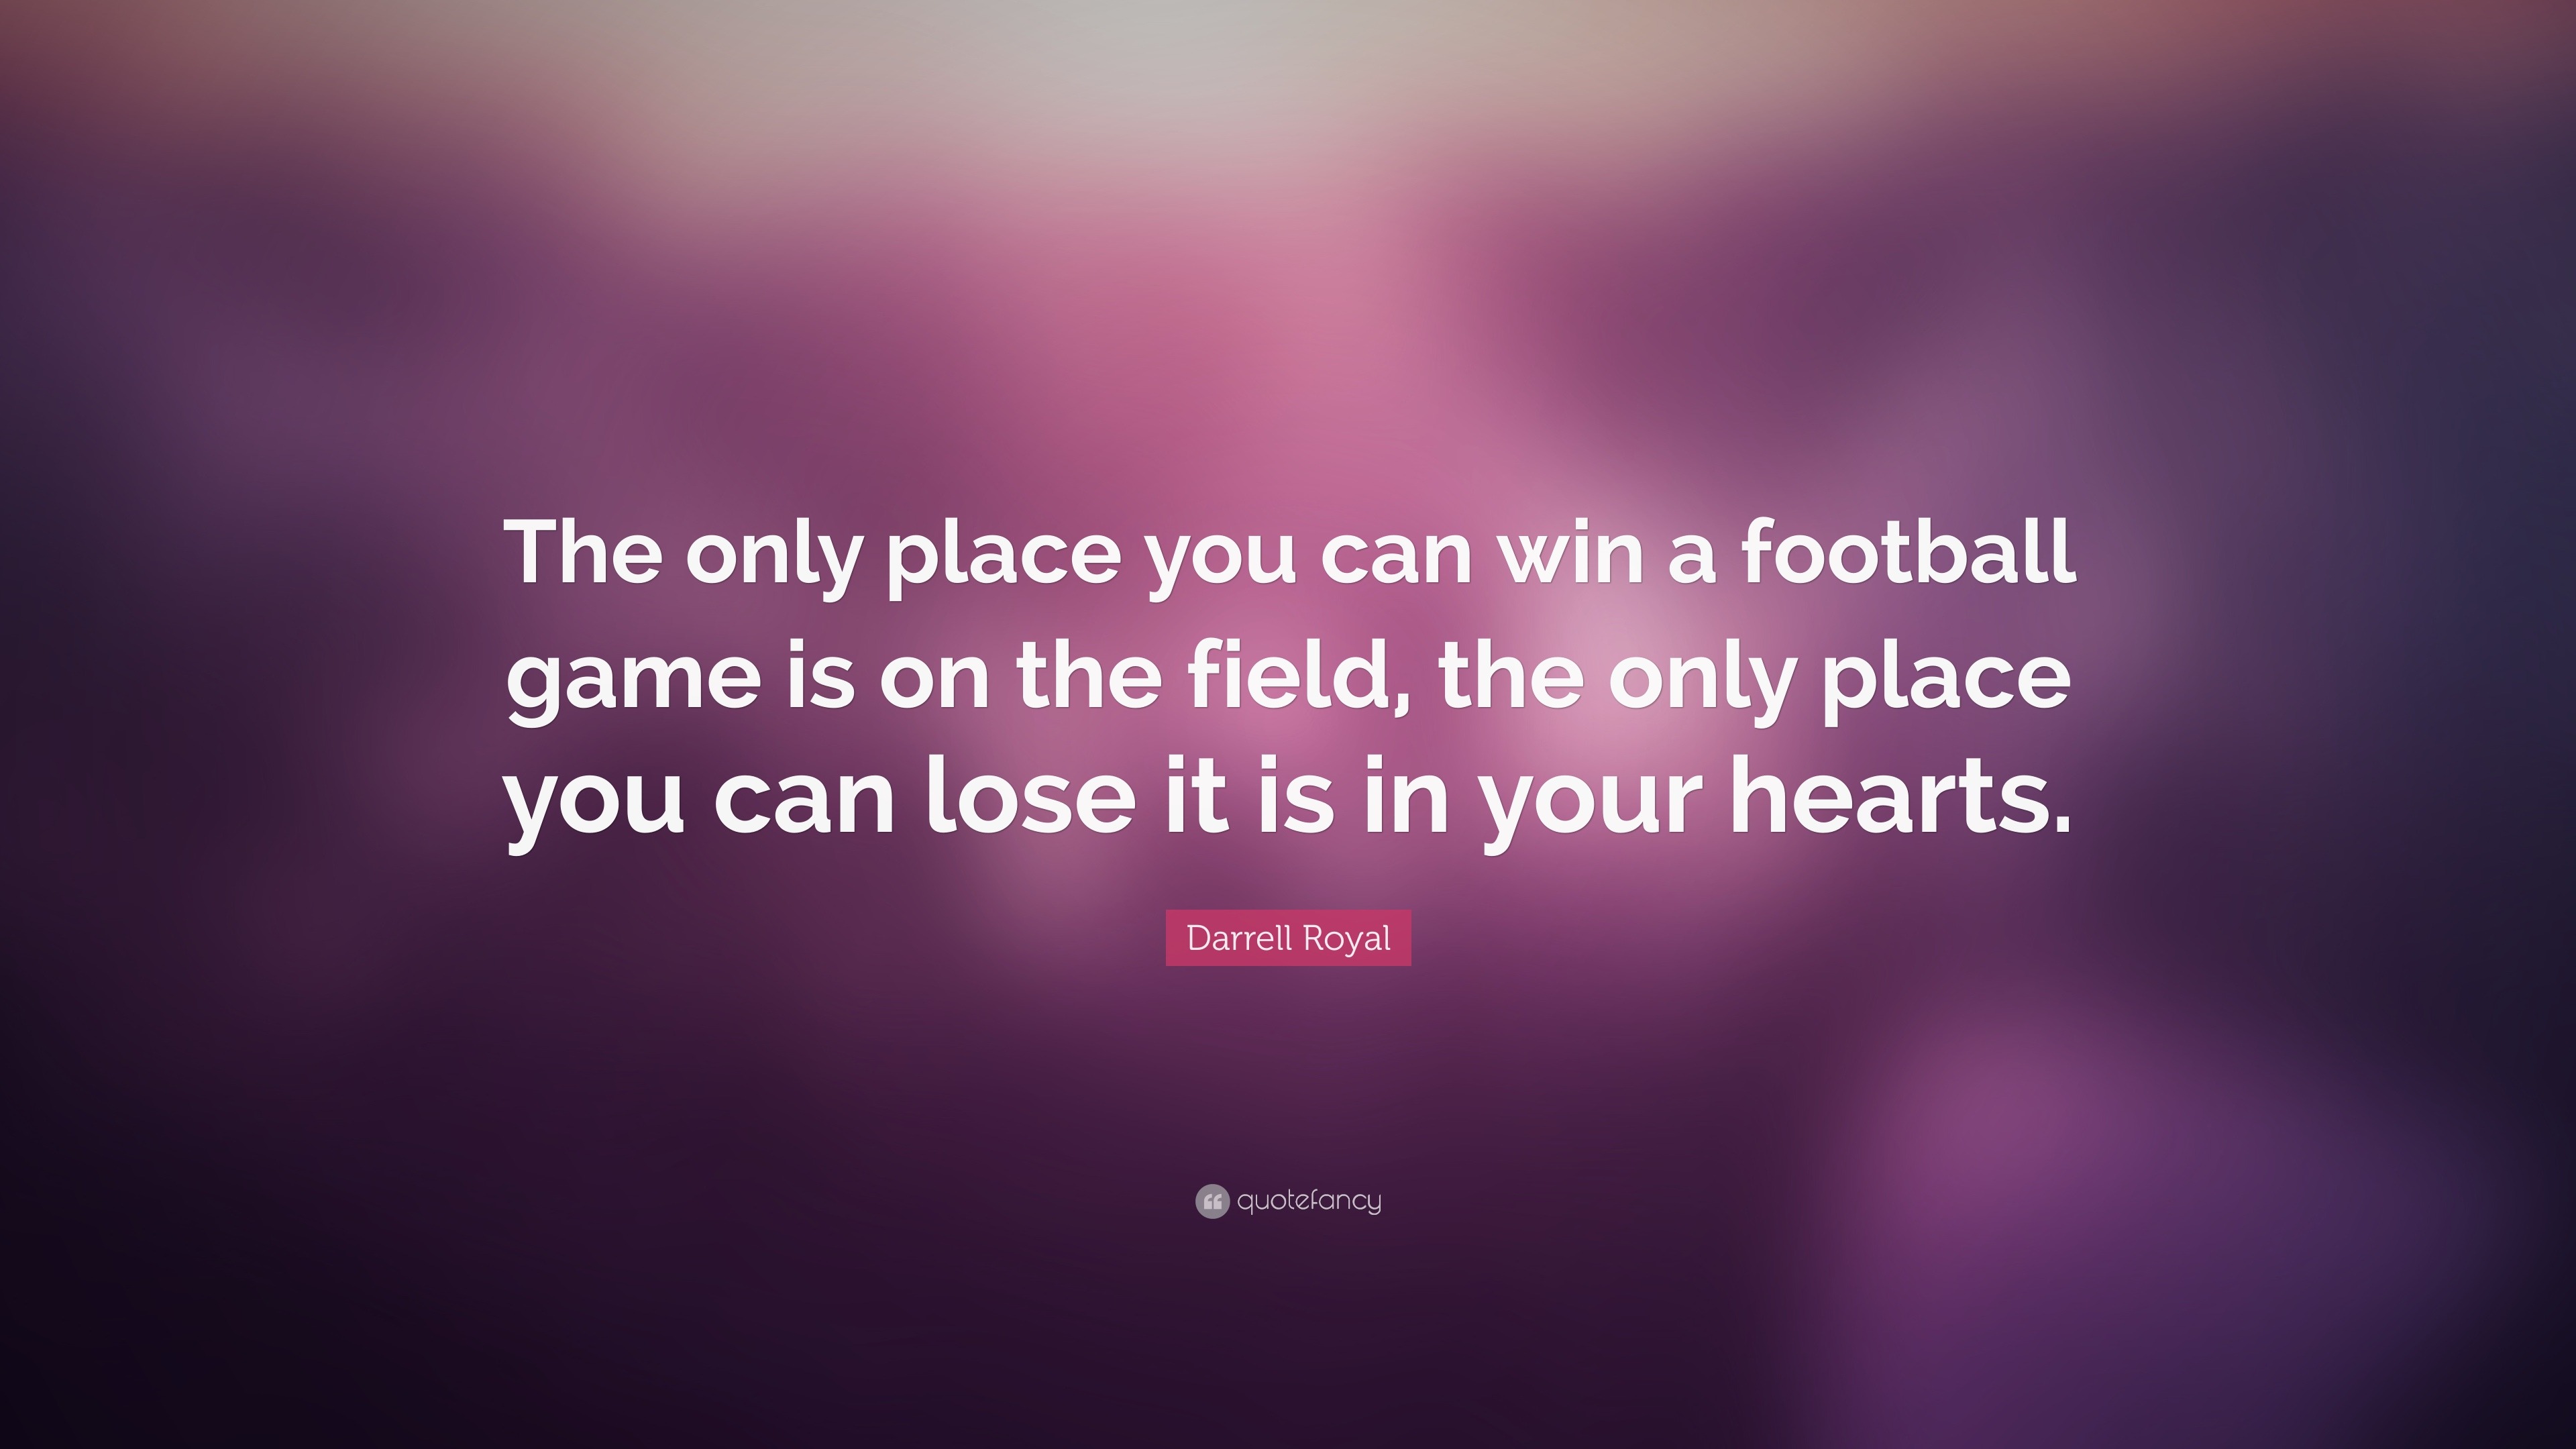 Darrell Royal Quote: "The only place you can win a football game is on the field, the only place ...